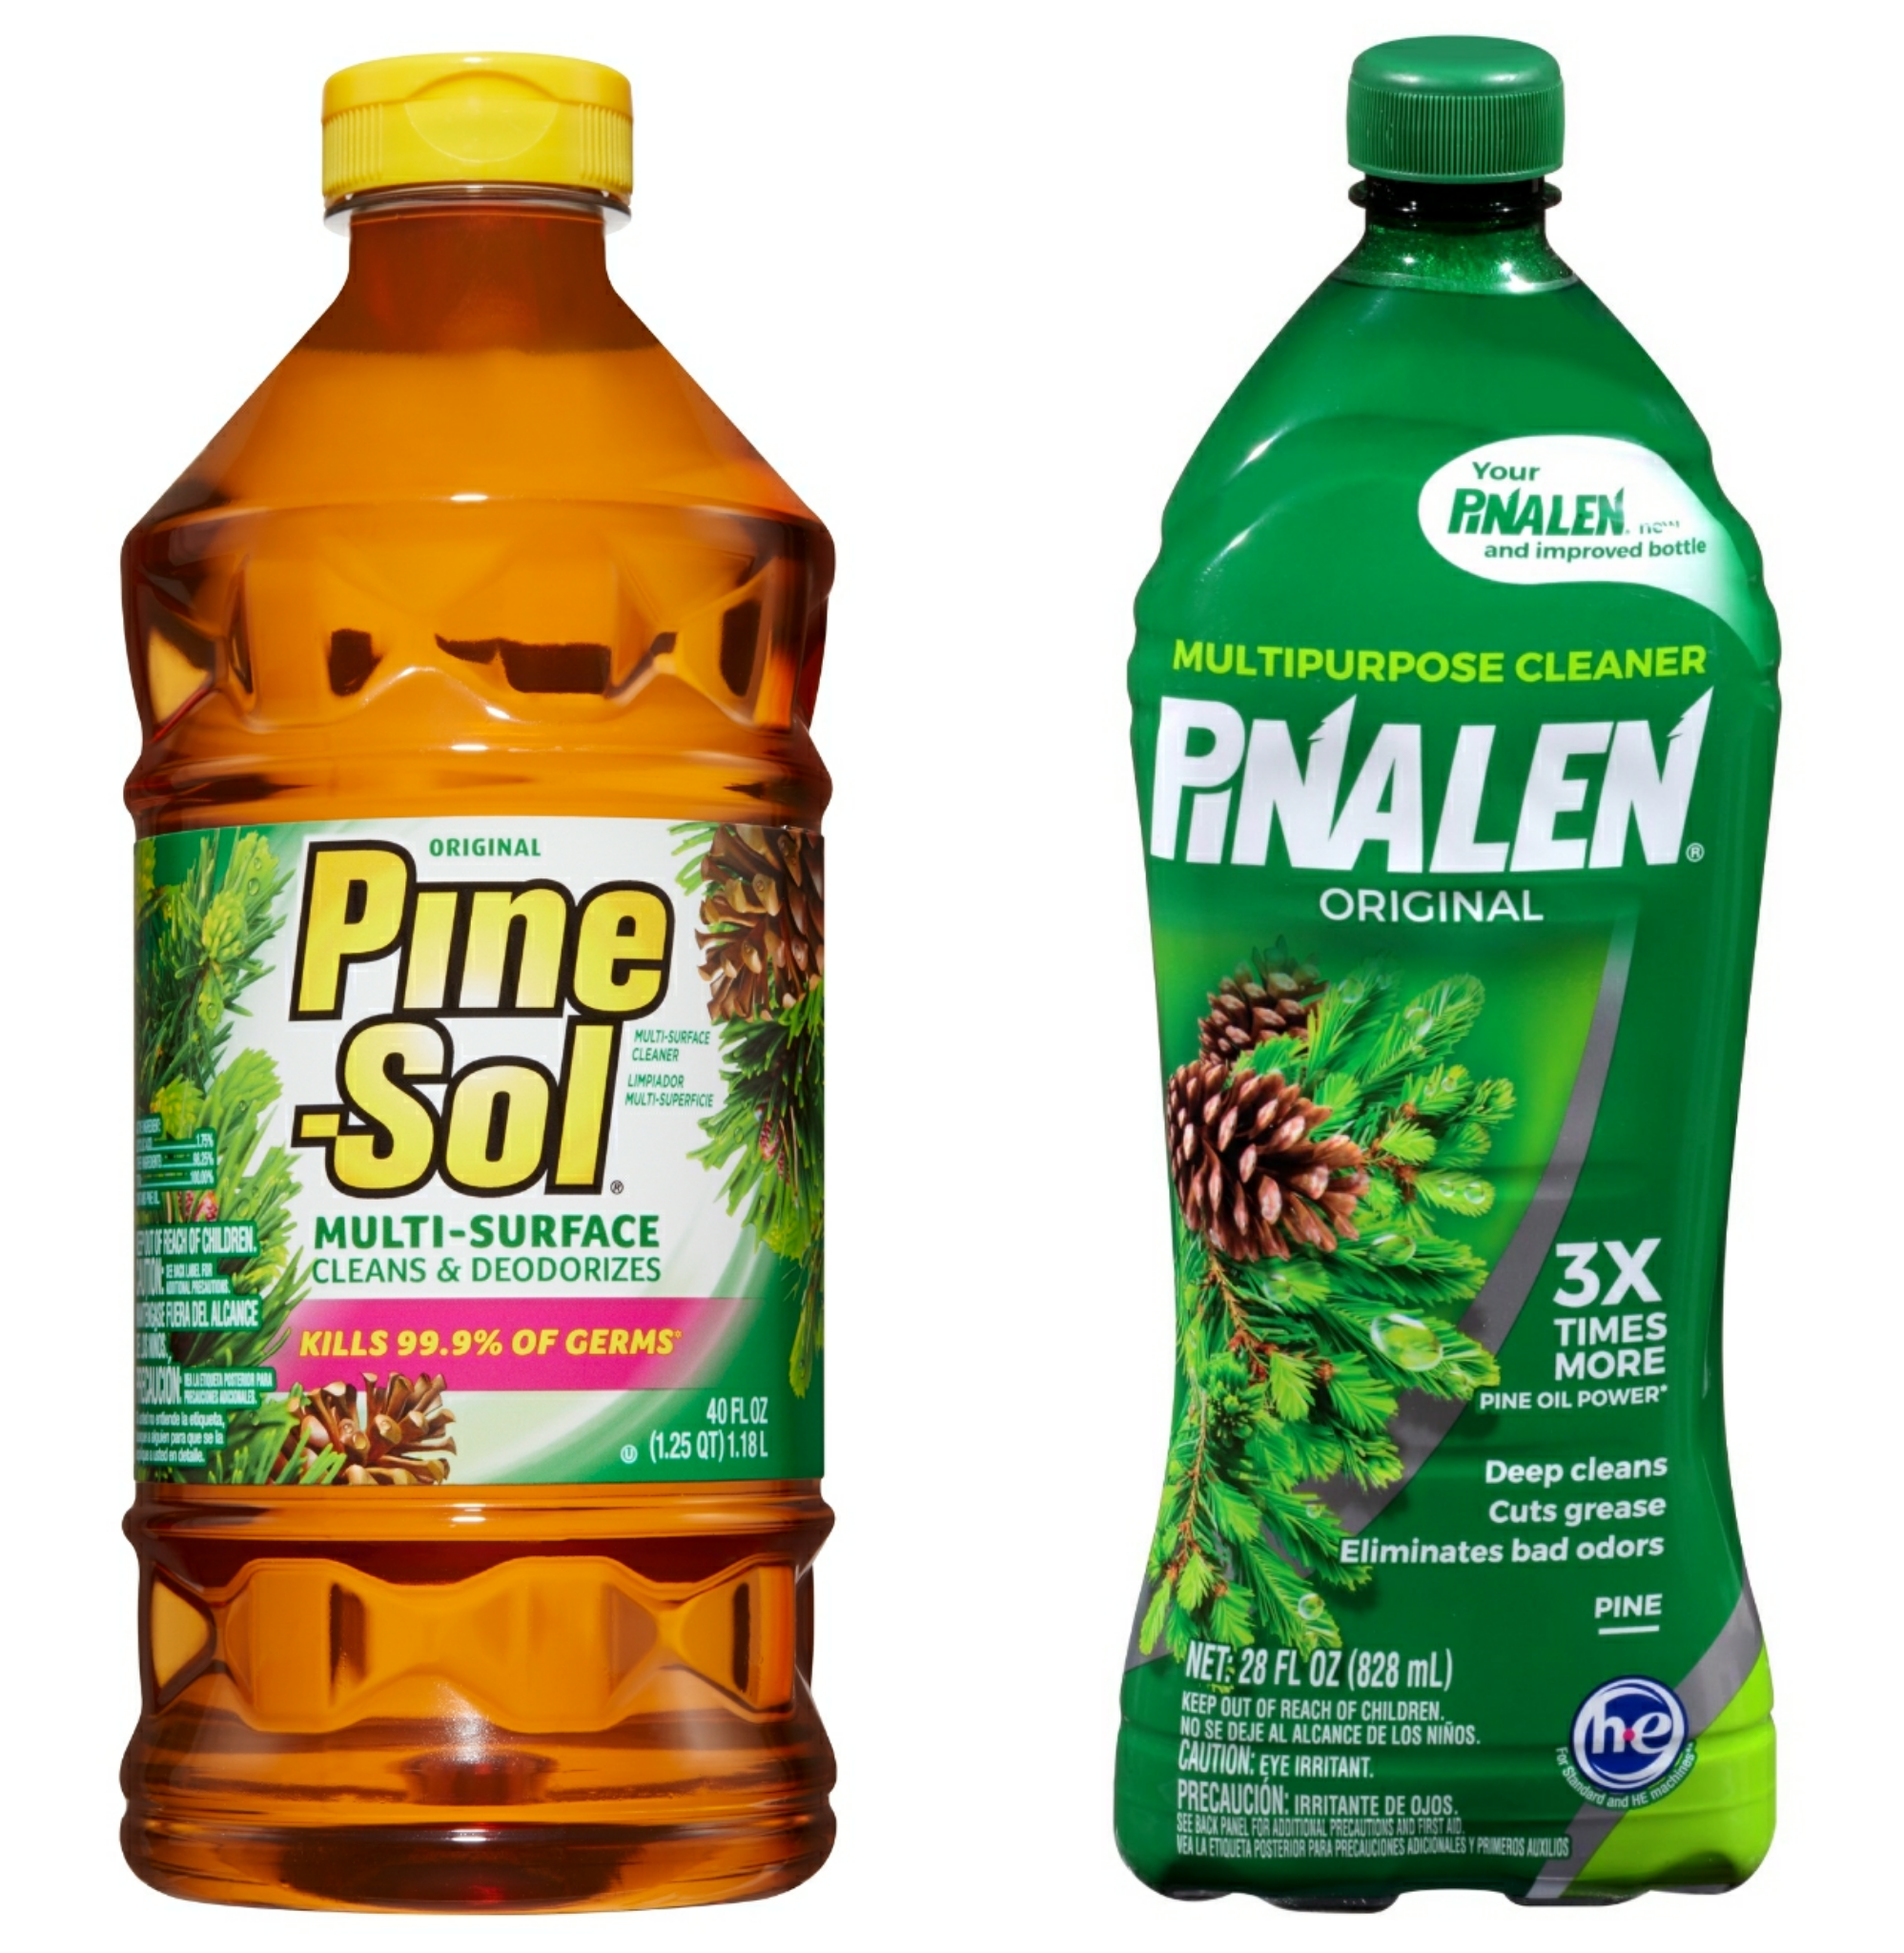 Can You Use Pine Sol in Laundry?